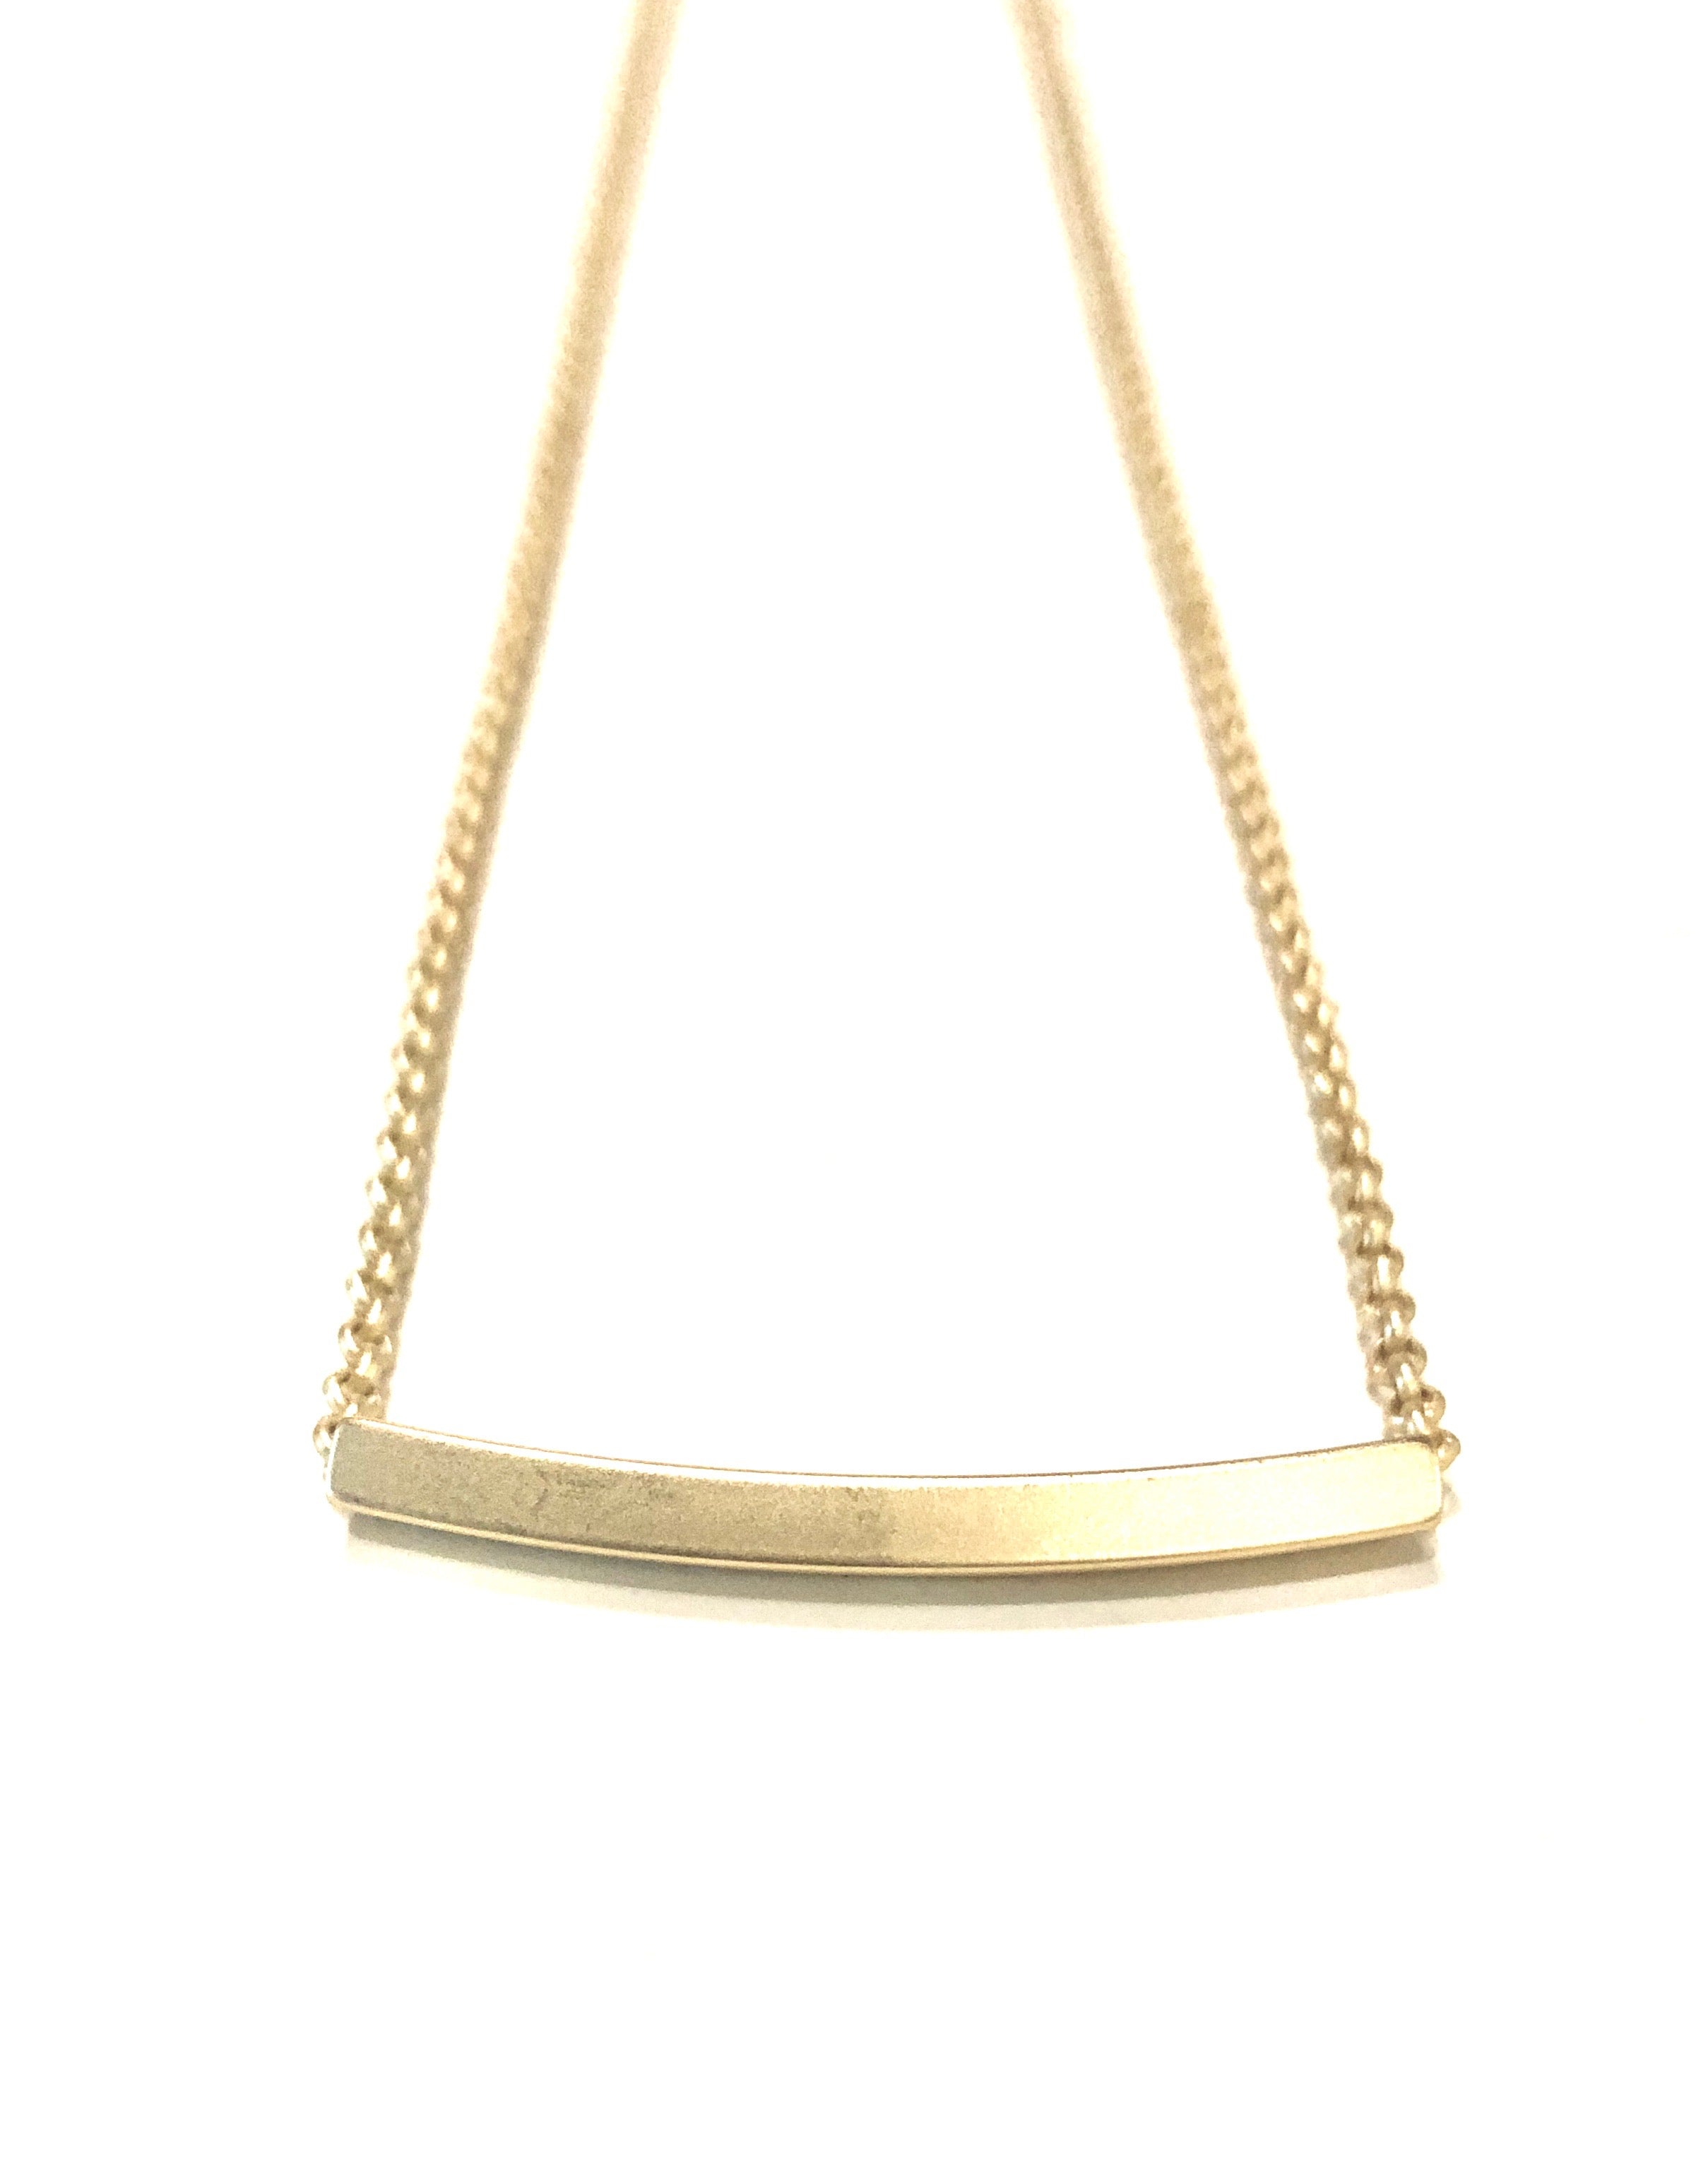 Muse - necklace with curved bar slider